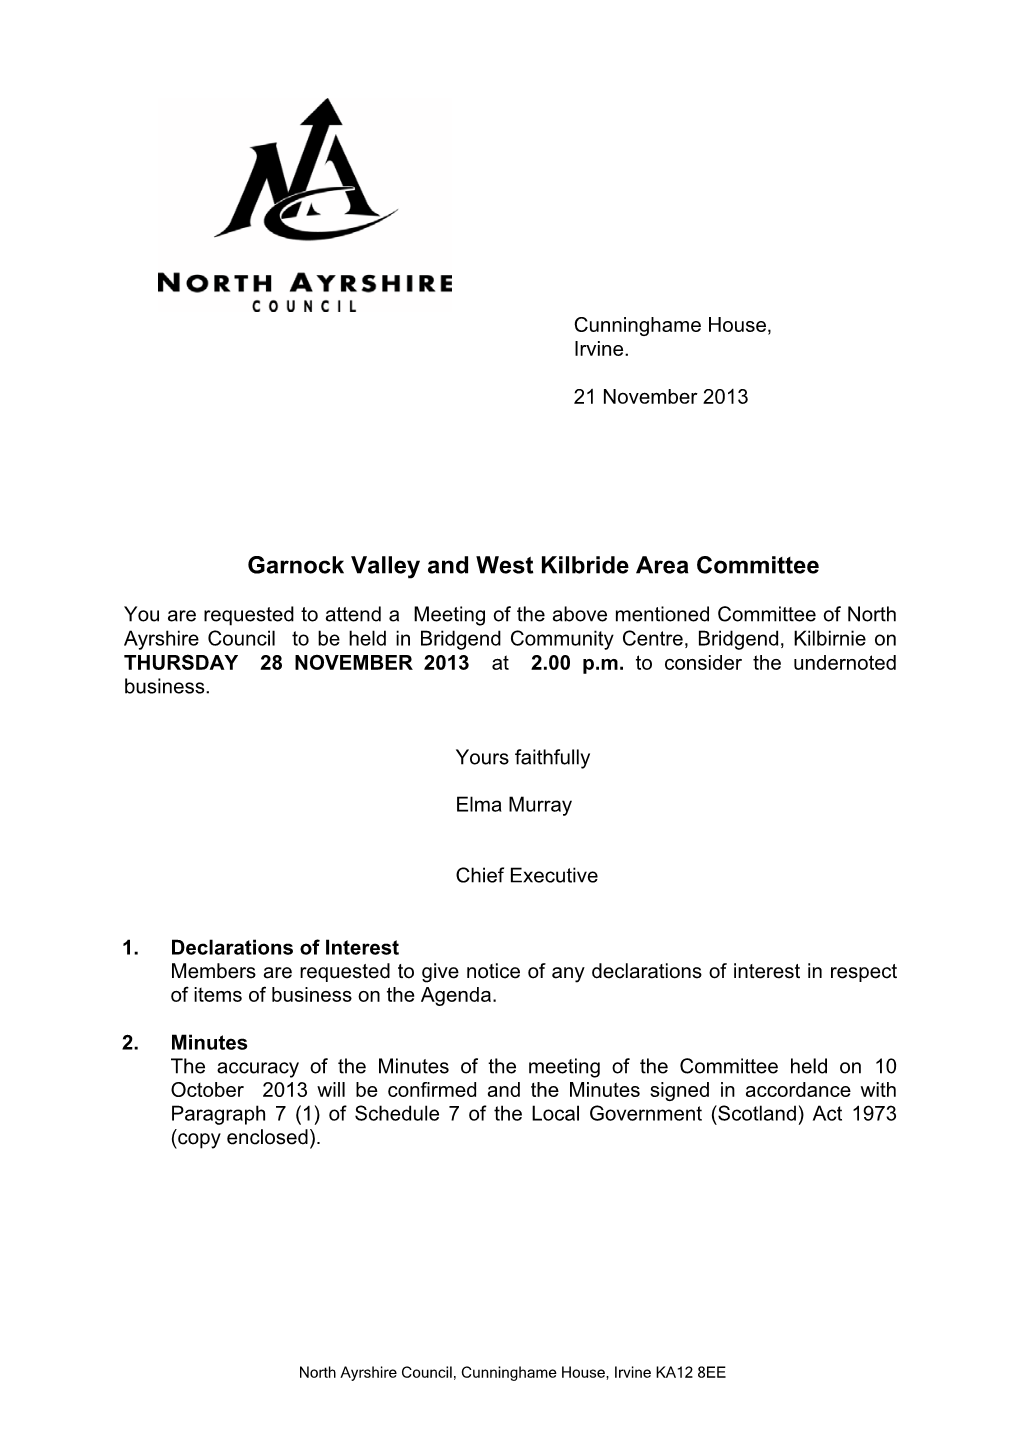 Garnock Valley and West Kilbride Area Committee